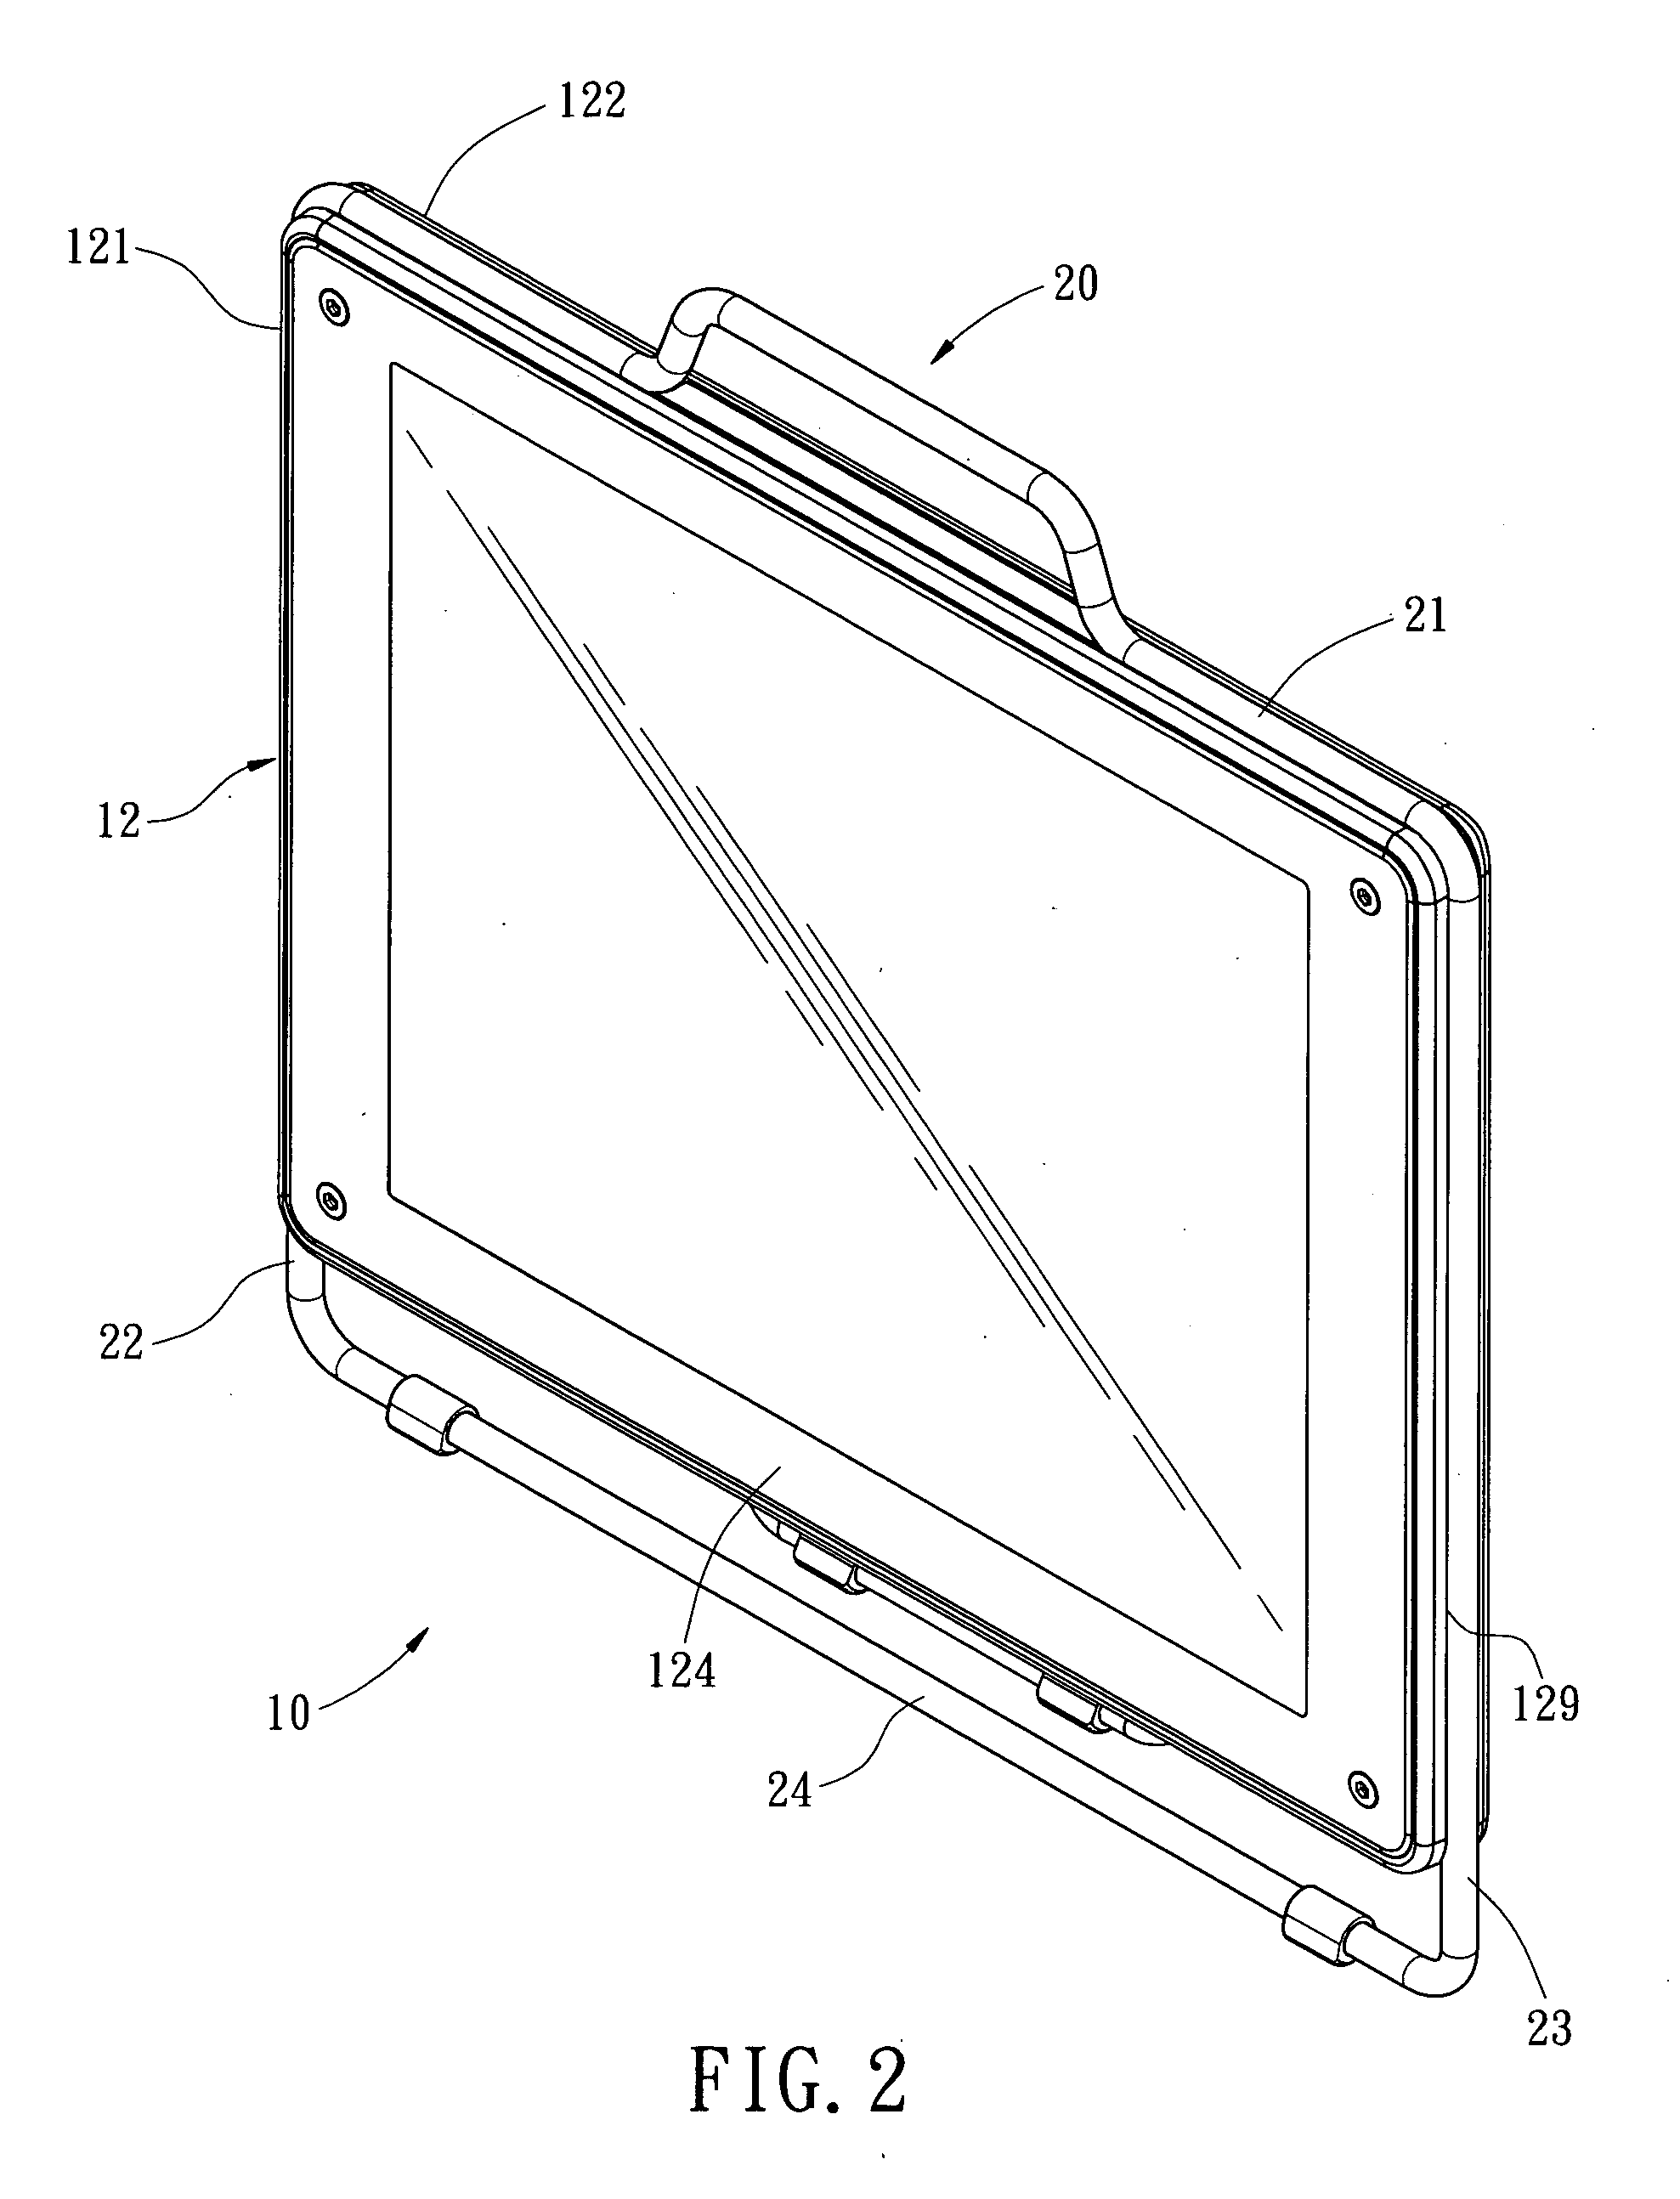 Monitor frame structure